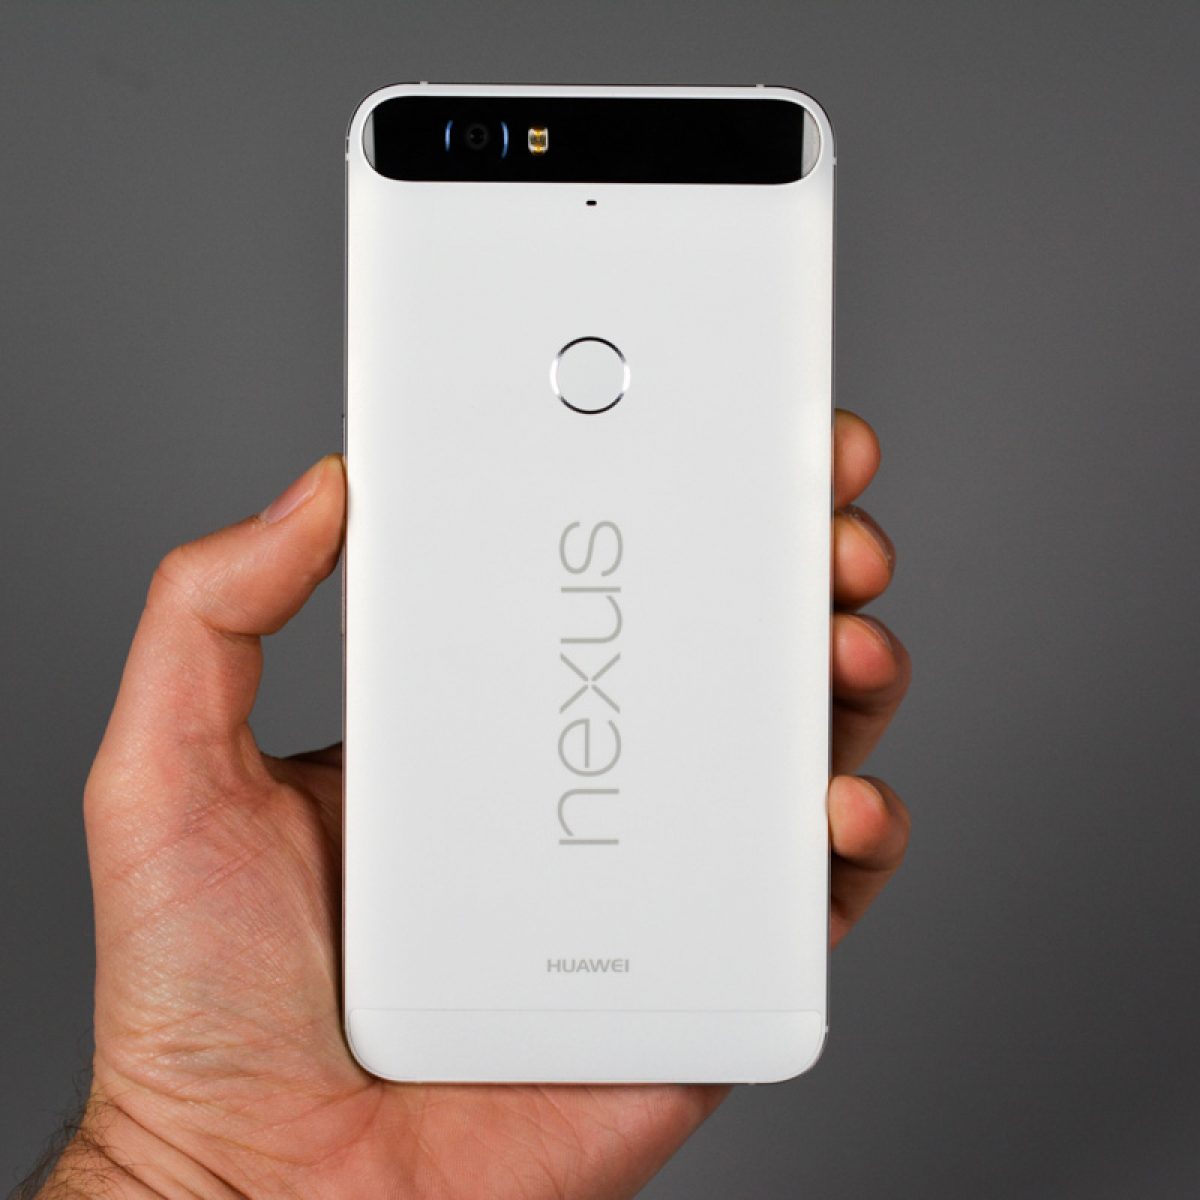 arm Circus Ontembare Deal: Buy a Nexus 6P or Nexus 5X for $50 Off Through the Weekend